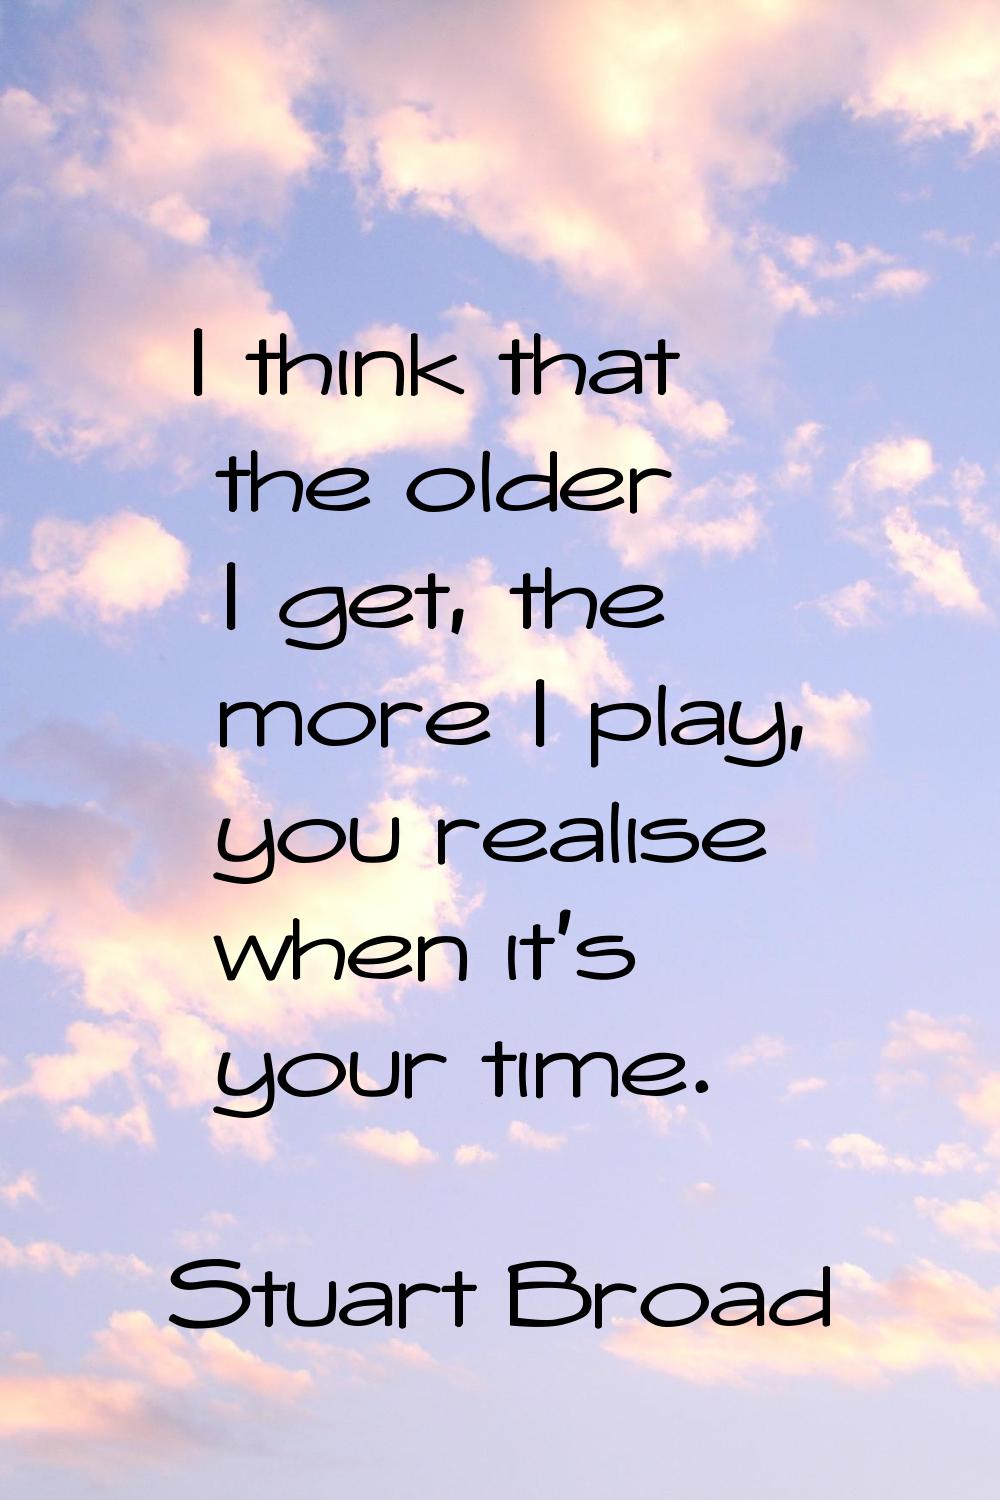 I think that the older I get, the more I play, you realise when it's your time.